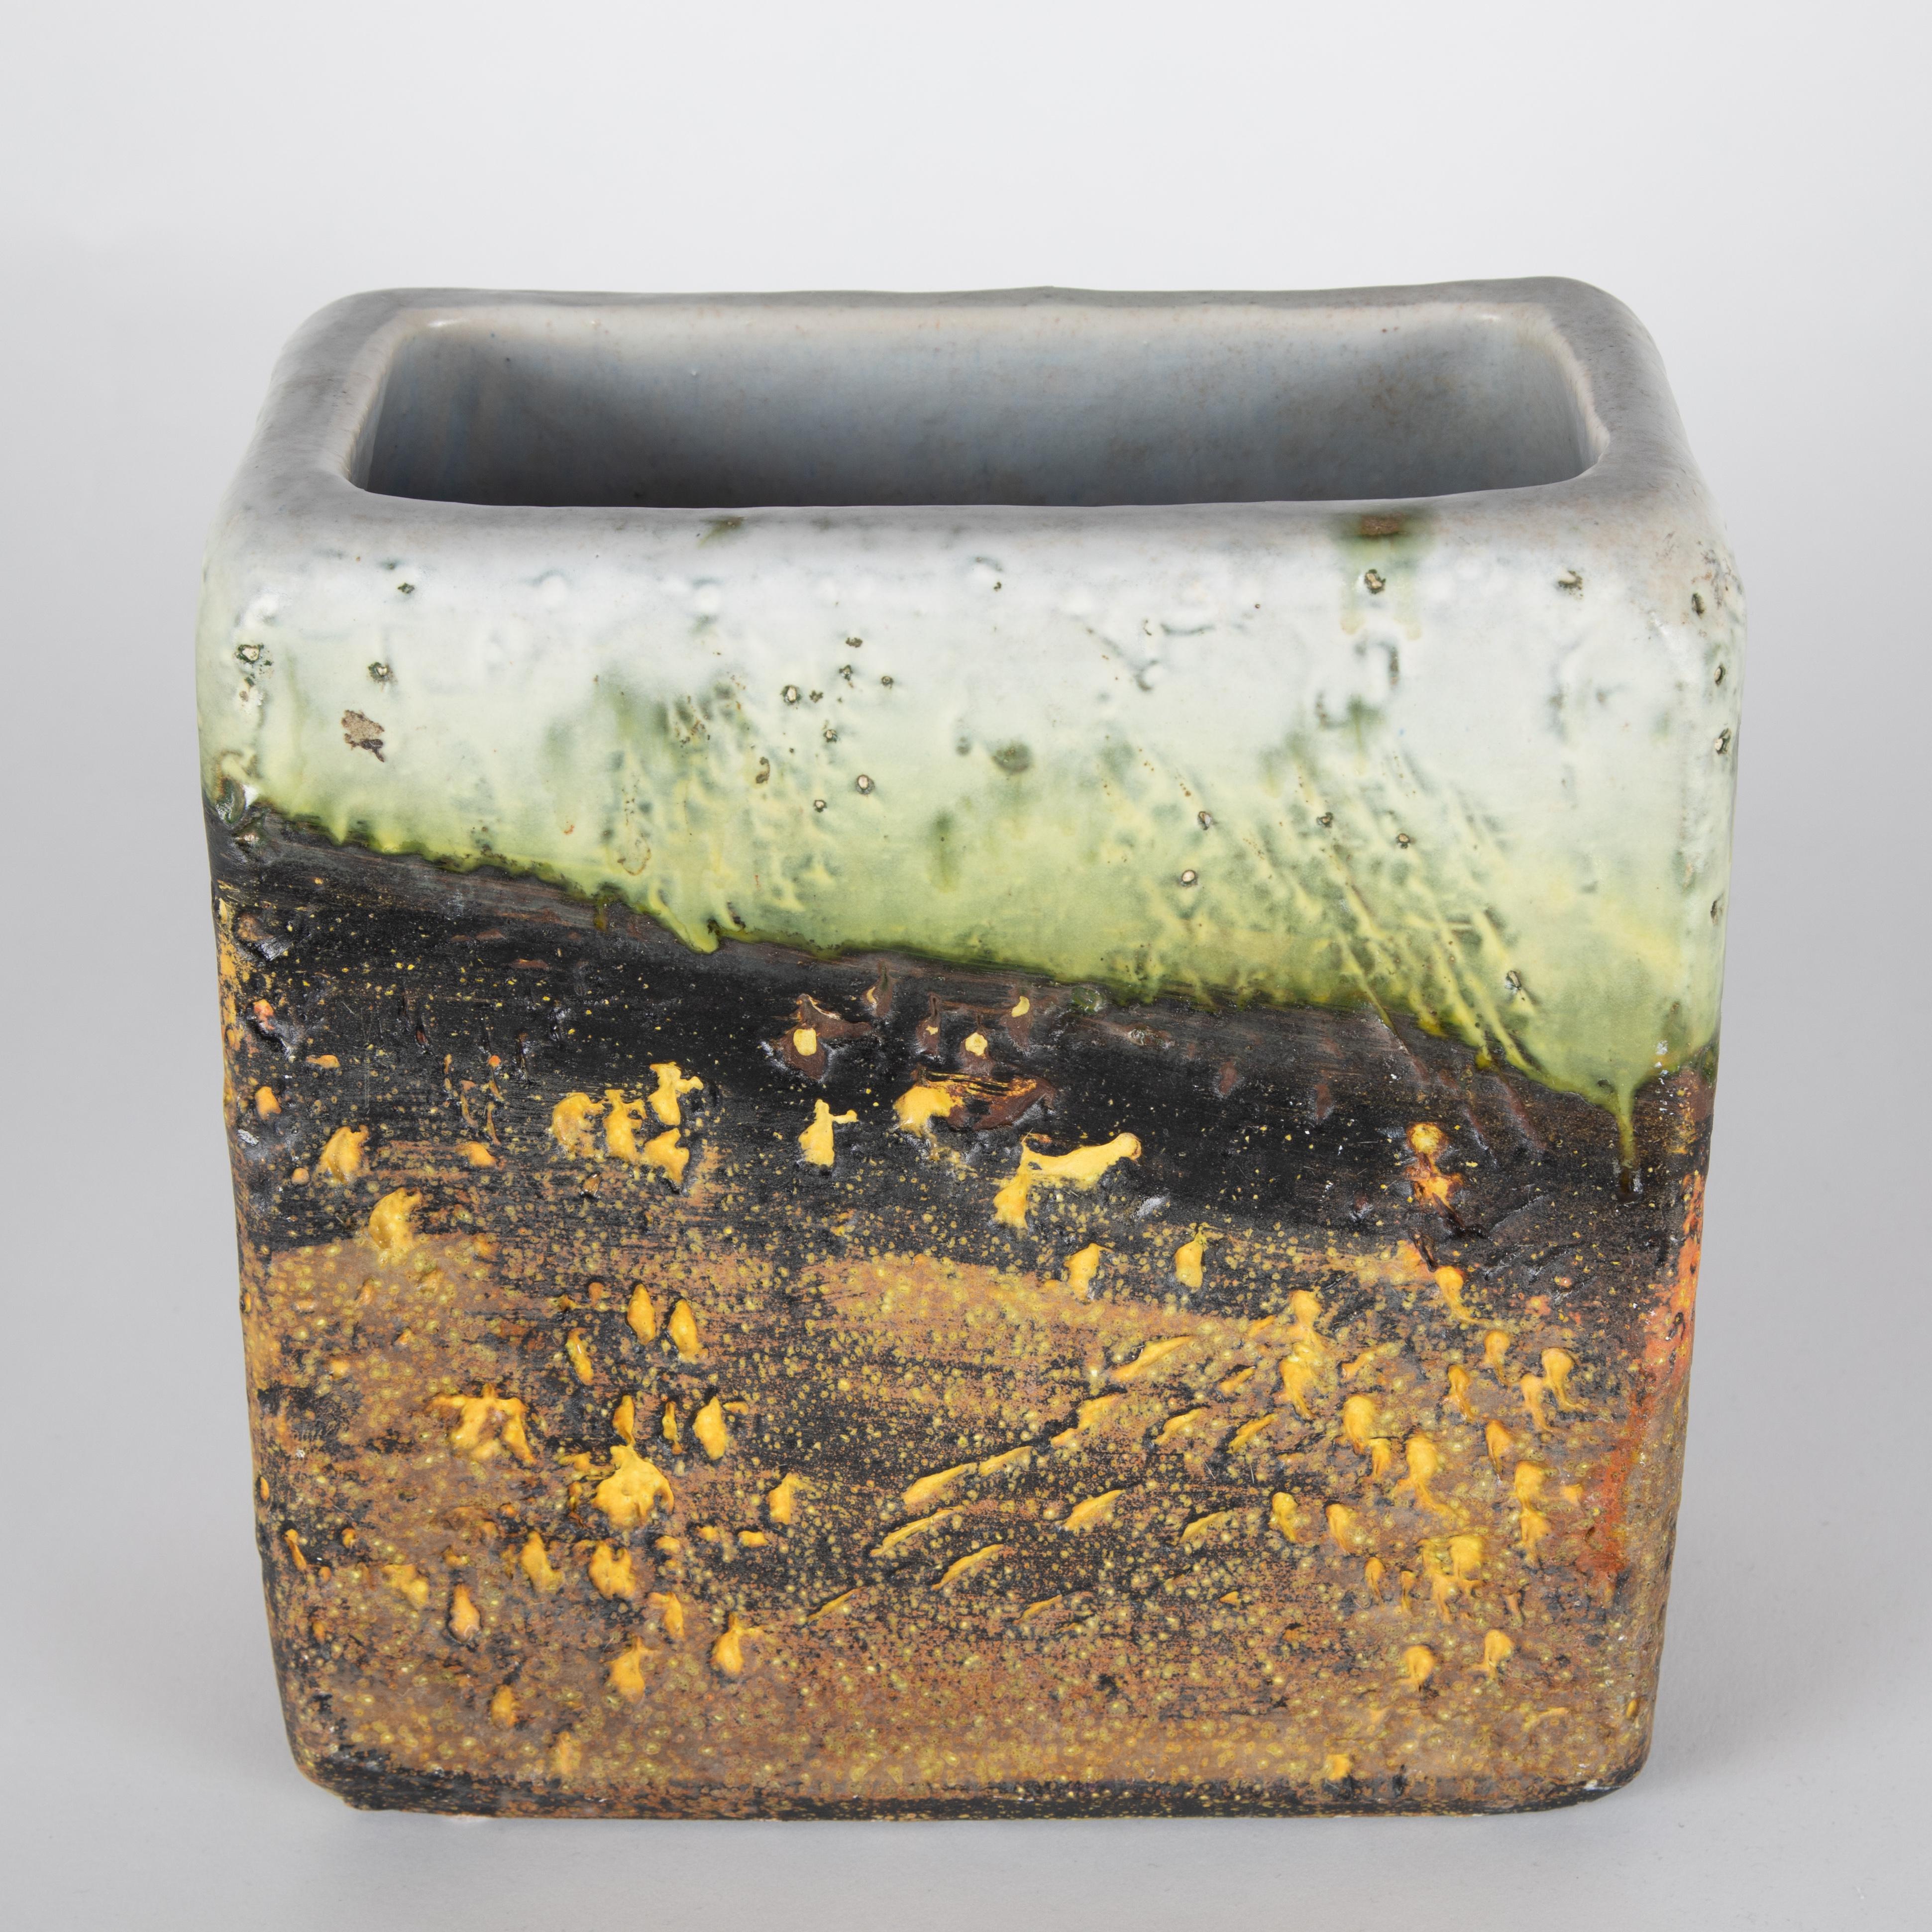 Large rectangular, hand-formed vase by Italian master ceramicist Marcello Fantoni. The lower portion of the vase has various shades of rough brown glaze with orange and yellow accents. The upper portion features milky-white and lime-green glazes on